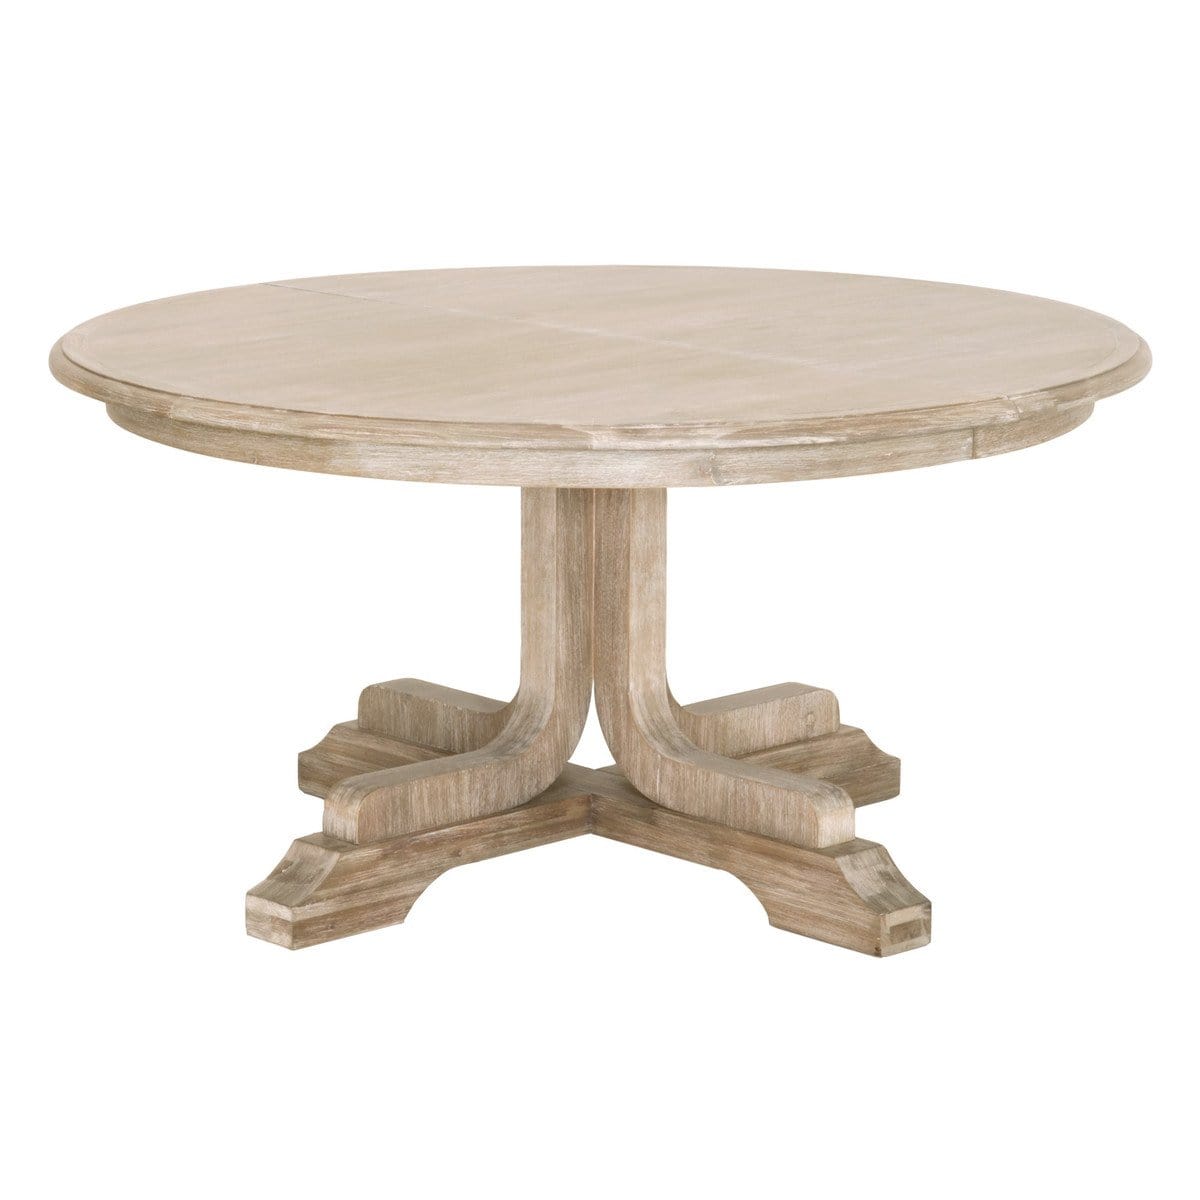 Candelabra Home Torrey 60" Round Extension Dining Table Furniture orient-express-6128.NG